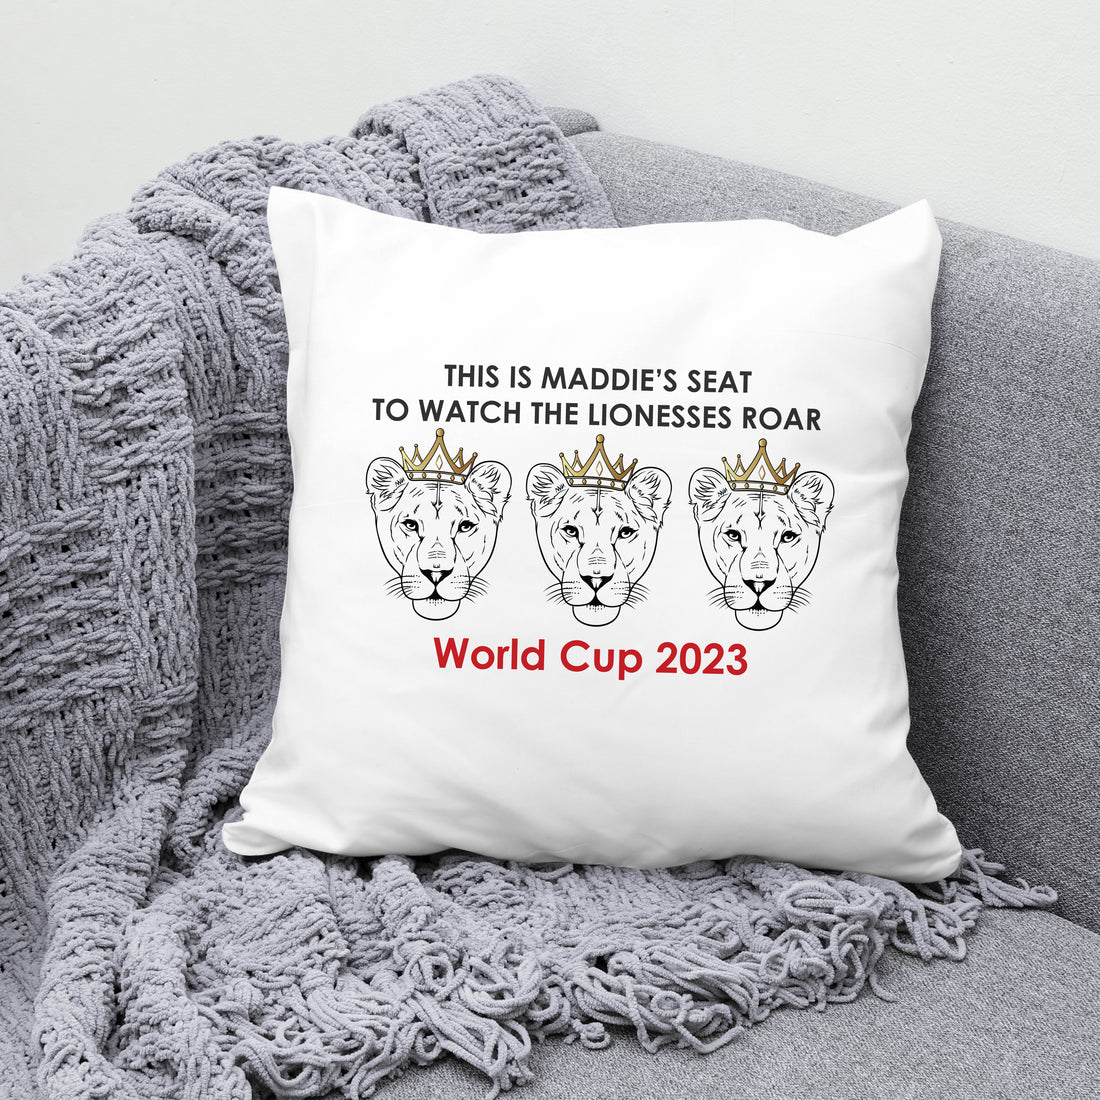 Celebrate the Lionesses in the Women's World Cup 2023 with these Must-Have Products for True Fans!